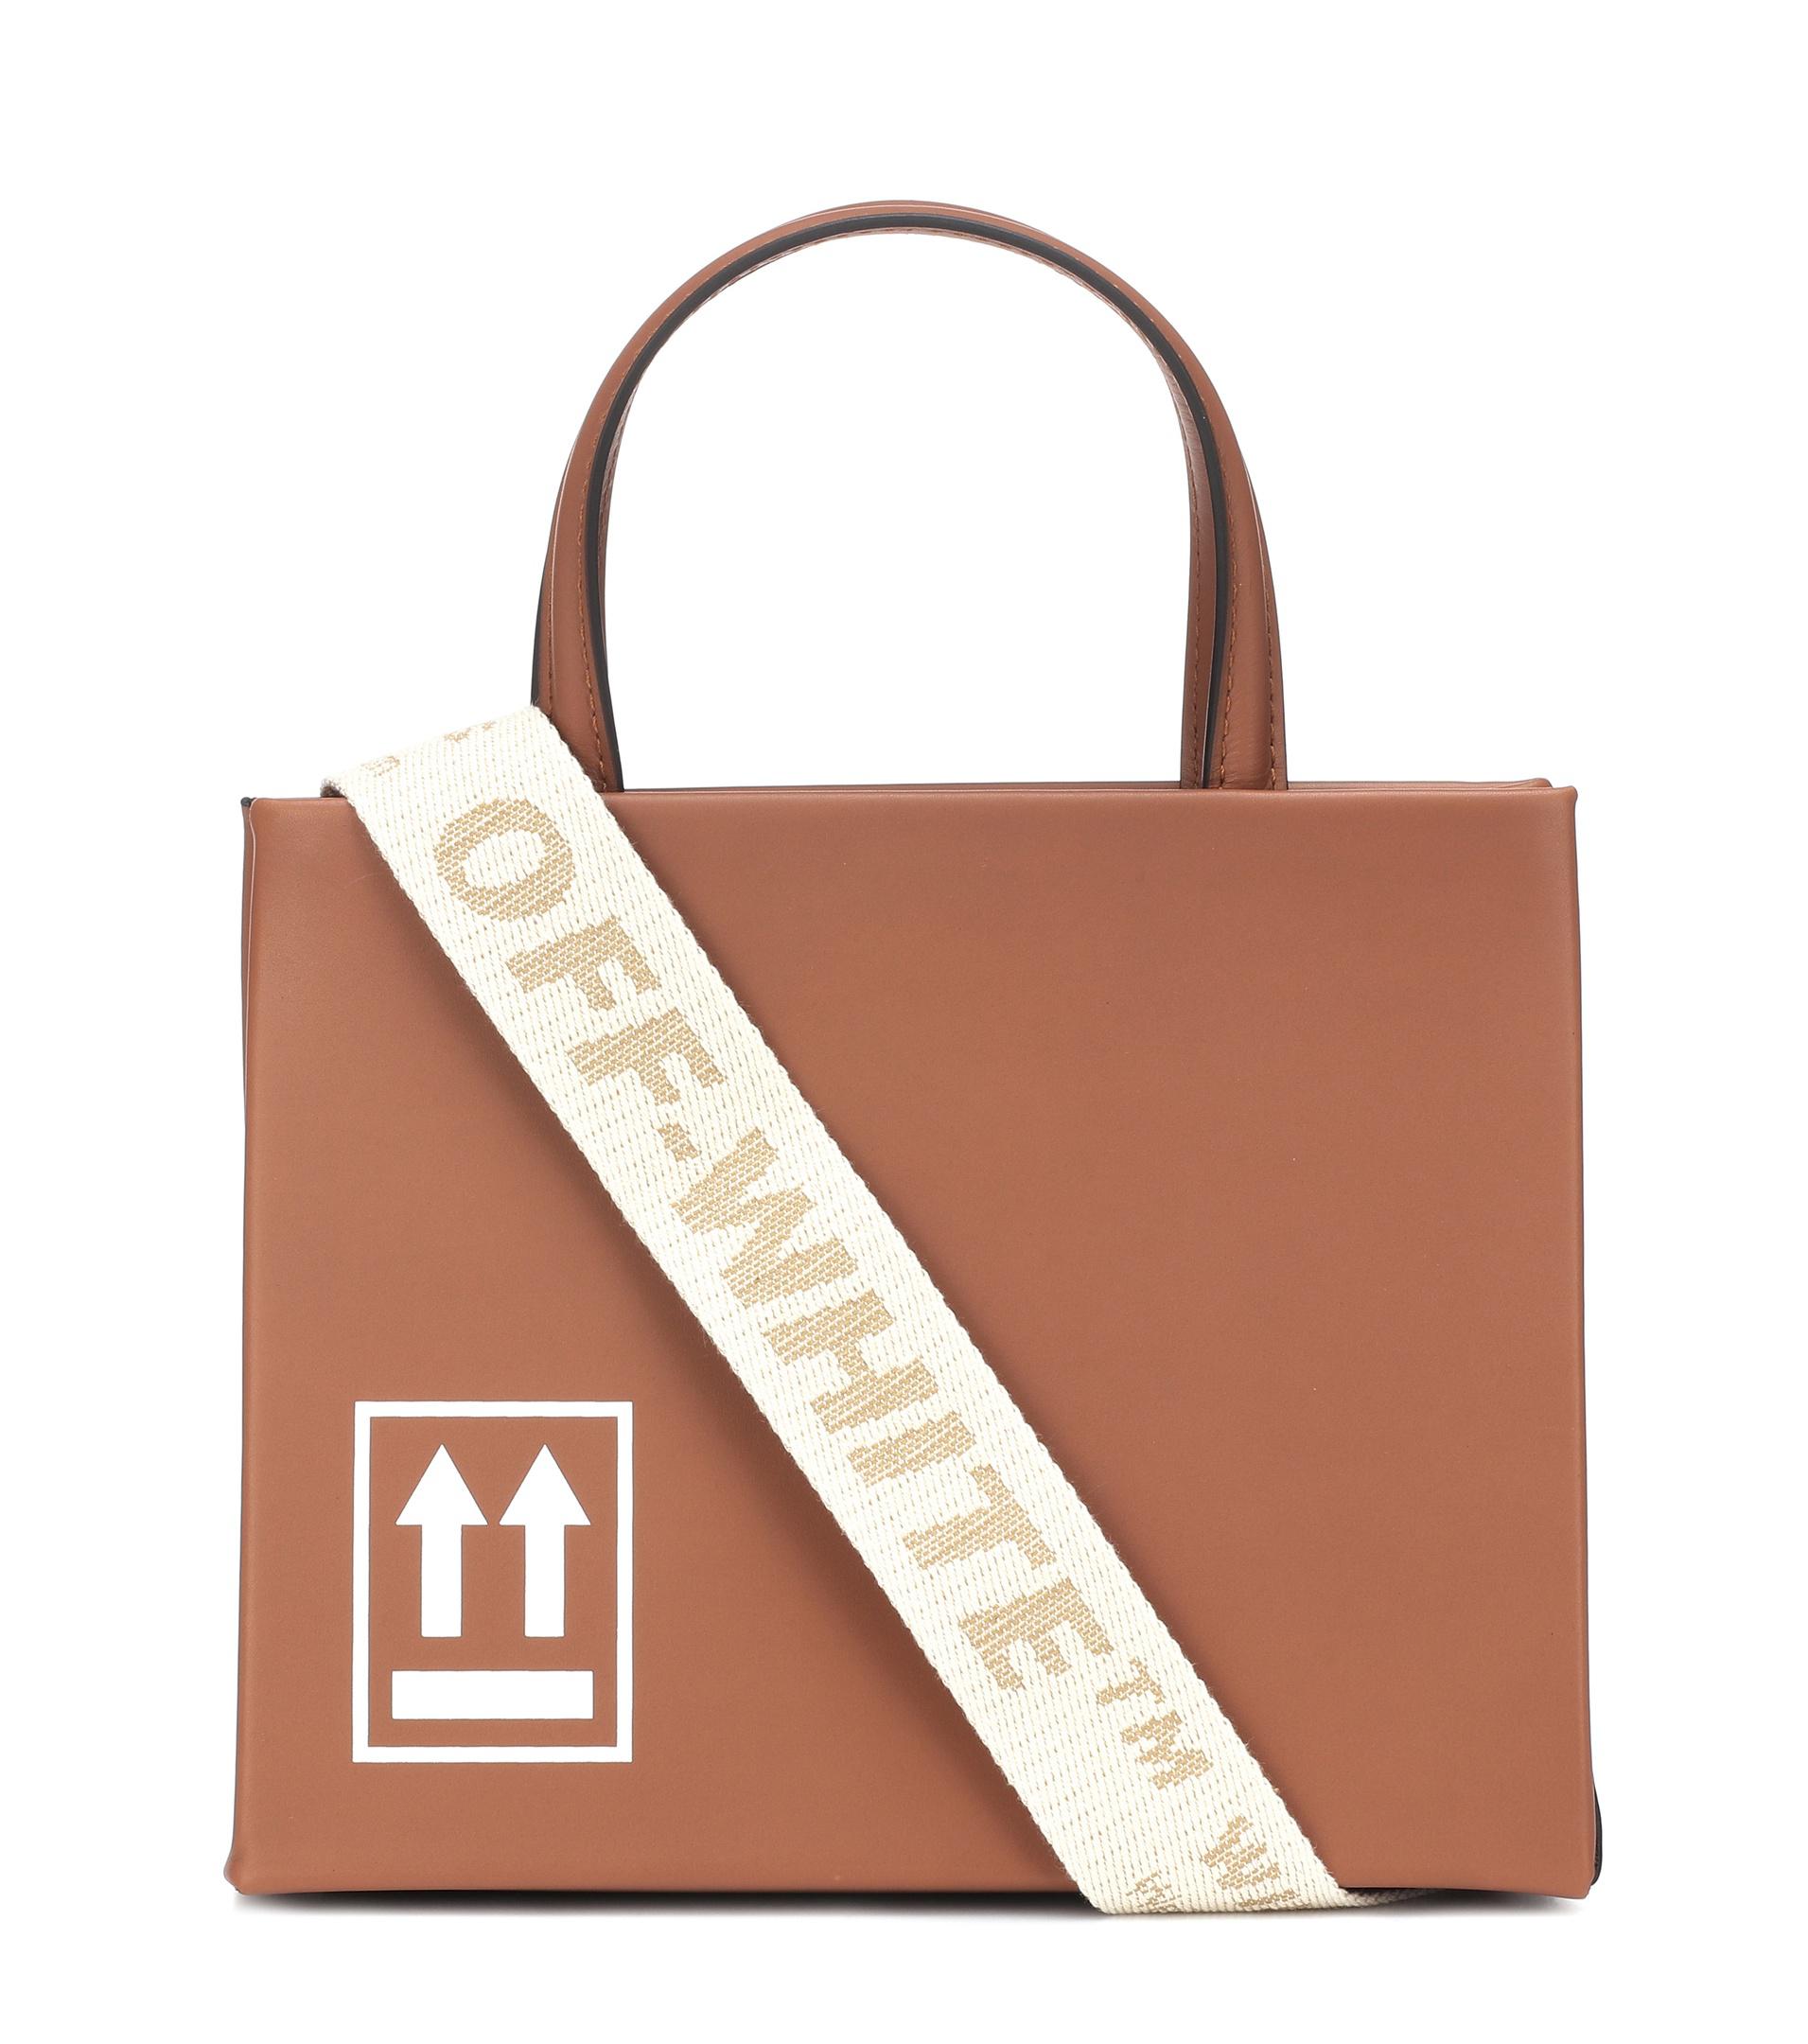 Off-White c/o Virgil Abloh Small Leather Screw Shoulder Bag in White